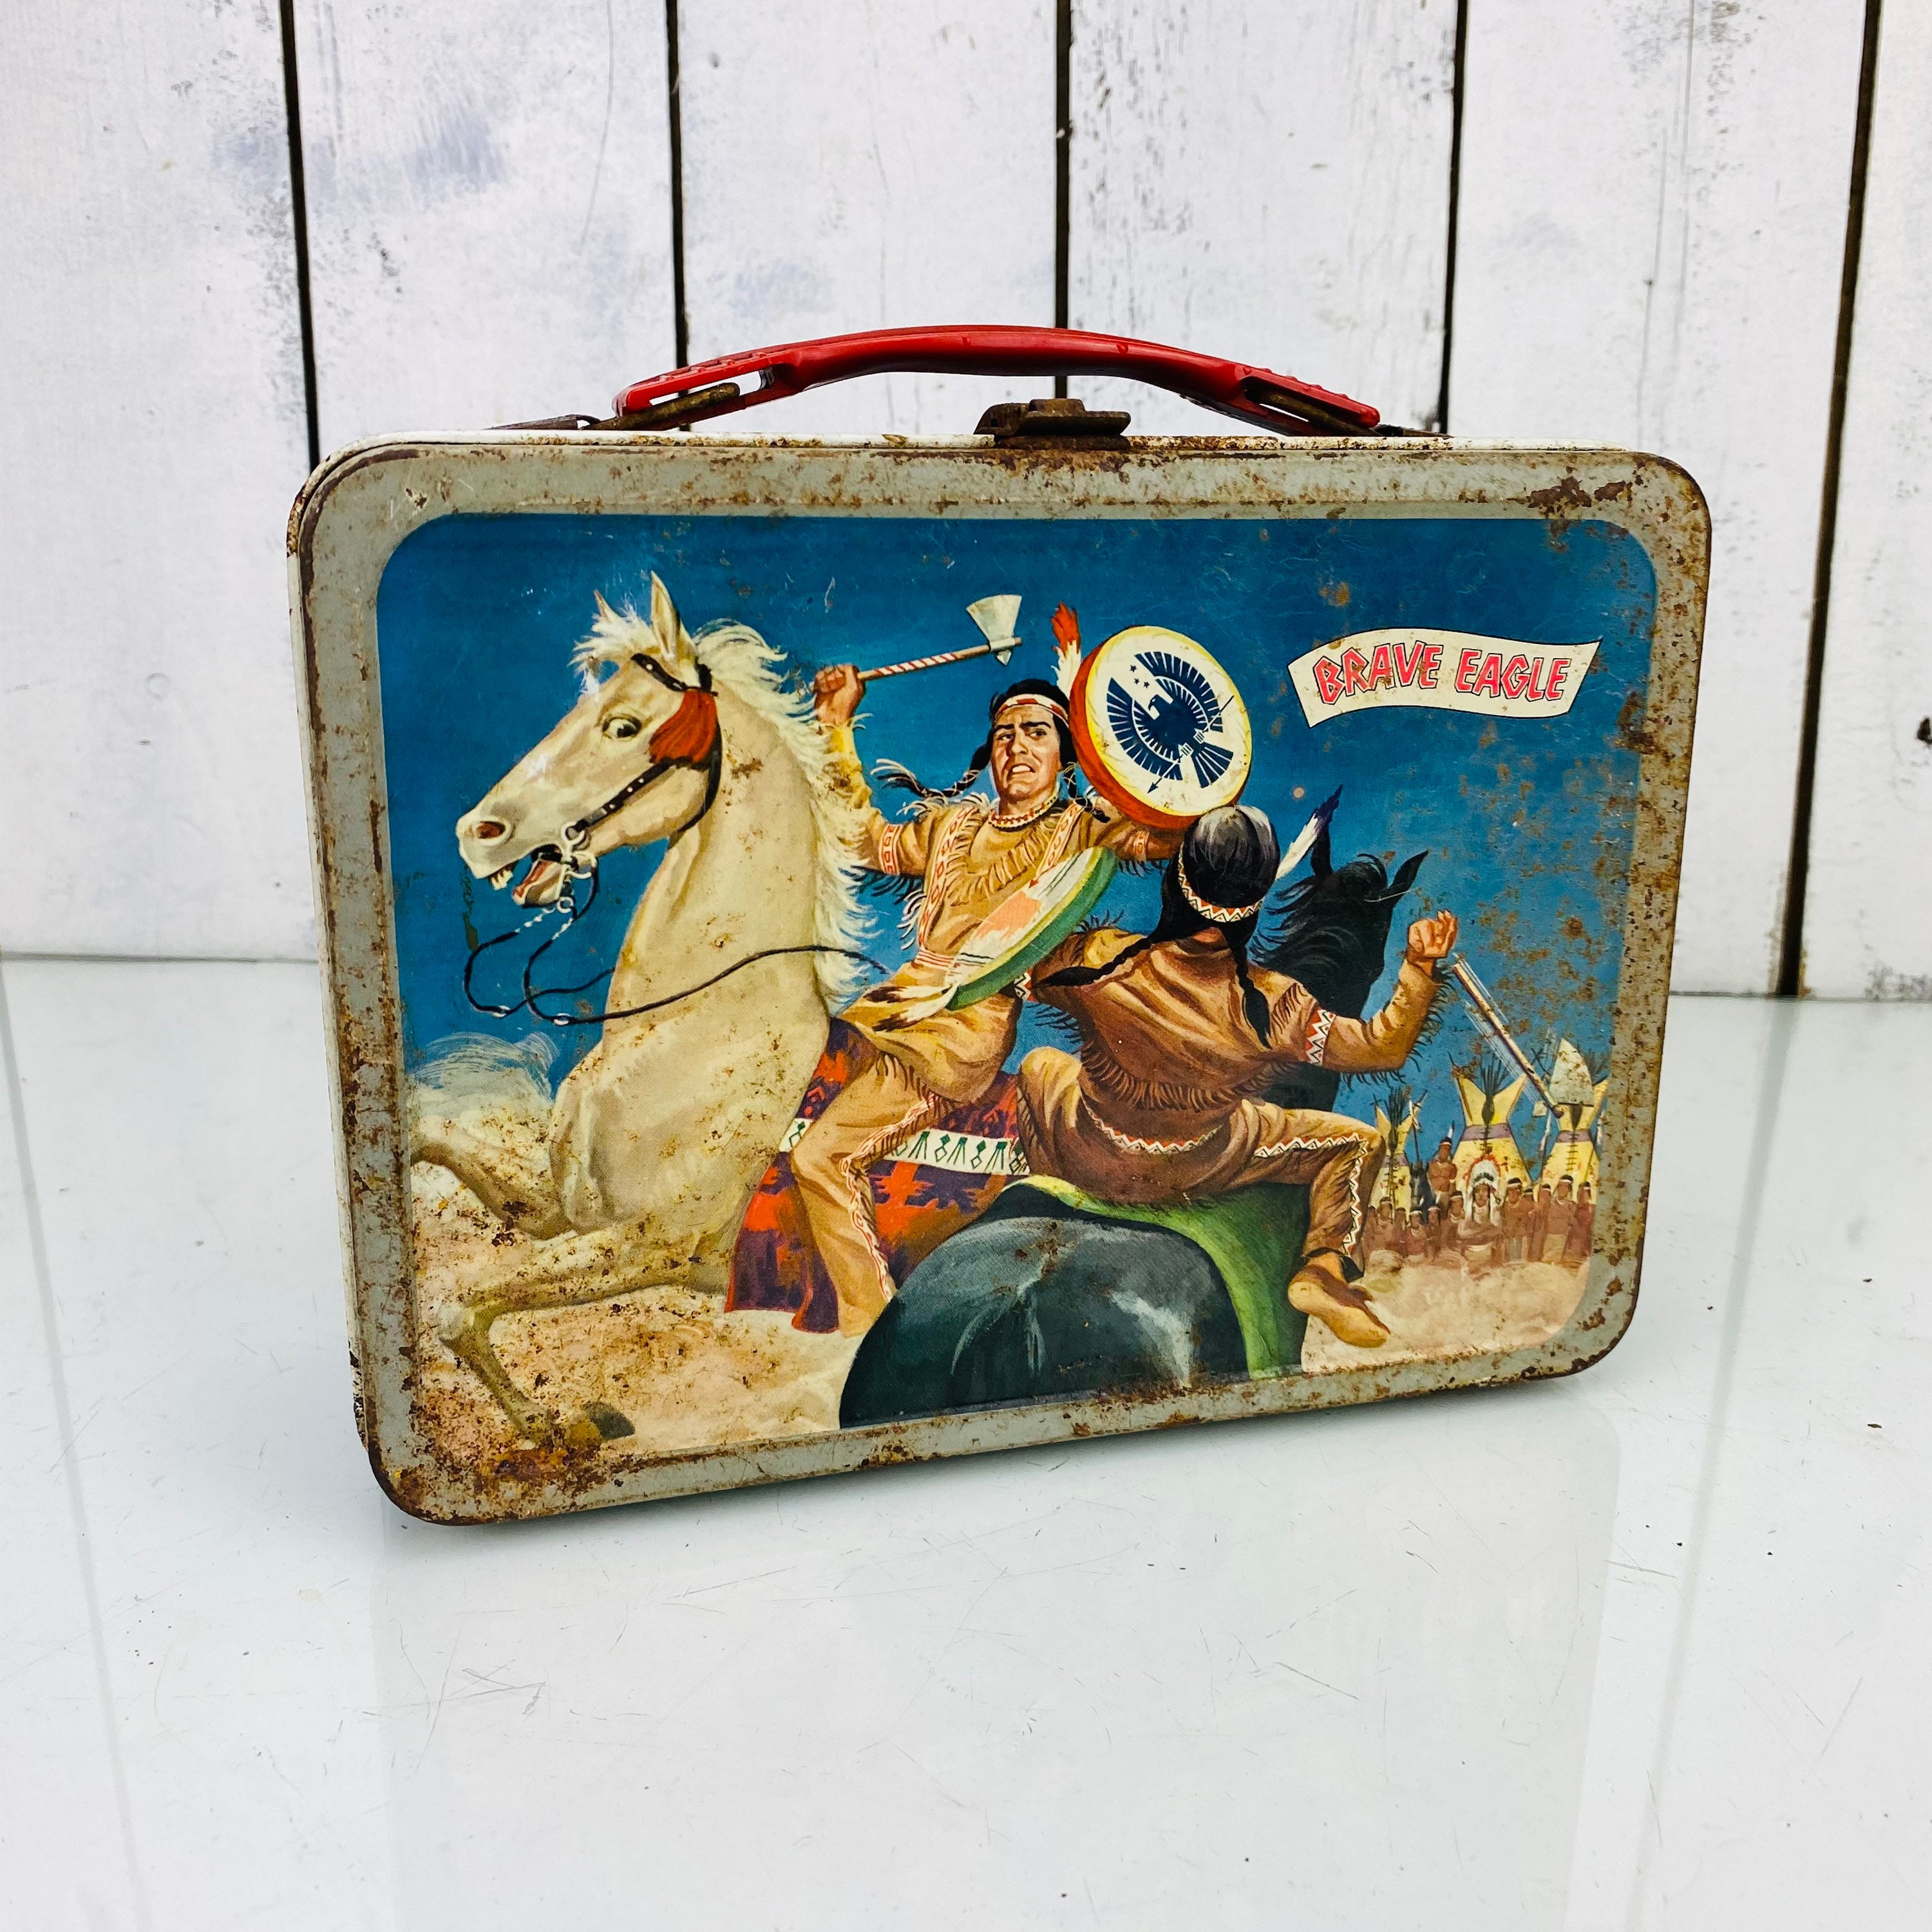 Vintage Handmade Two Compartment Lunch Box Nice Collectible Box